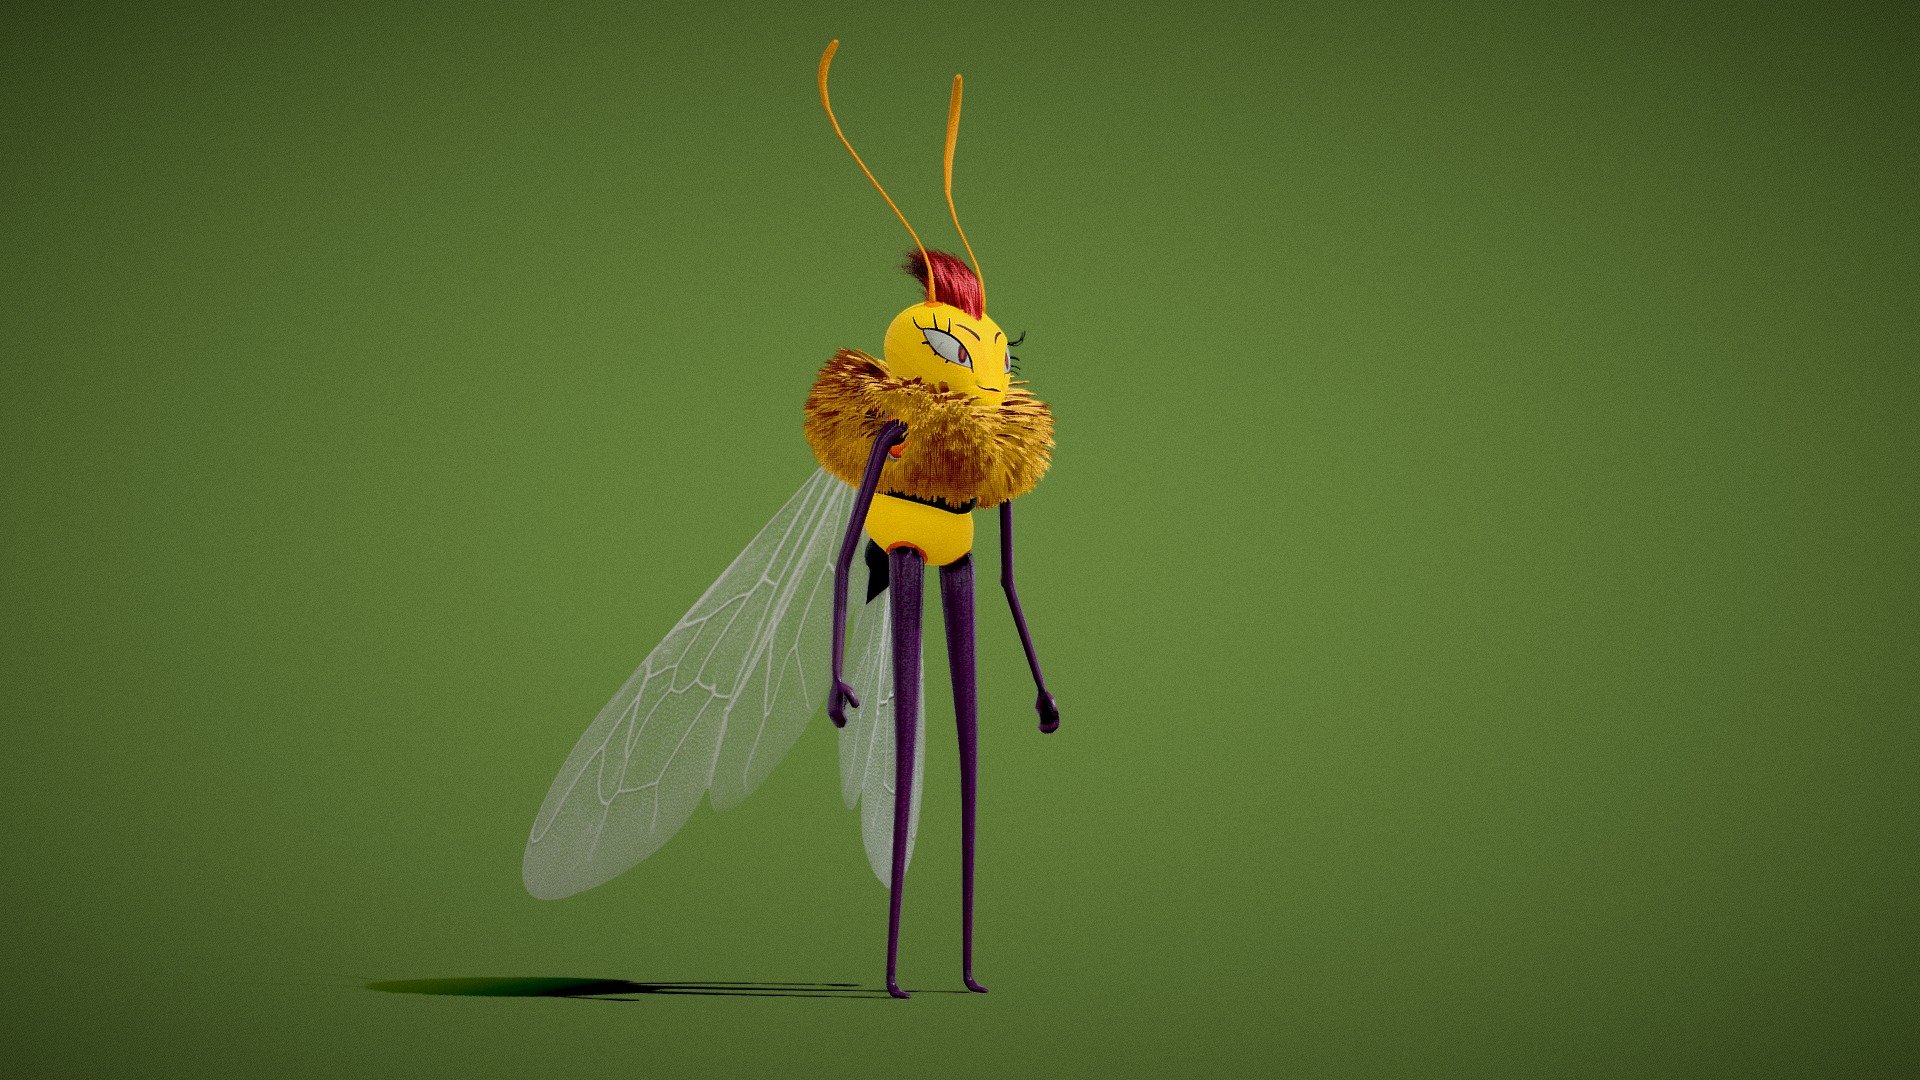 Bee Queen Cartoon

Modeled in Lightwave 2015 and textured with the help of Quixel Tools in Photoshop

Low poly model - Bee Queen Cartoon - 3D model by doncha_magoso 3d model